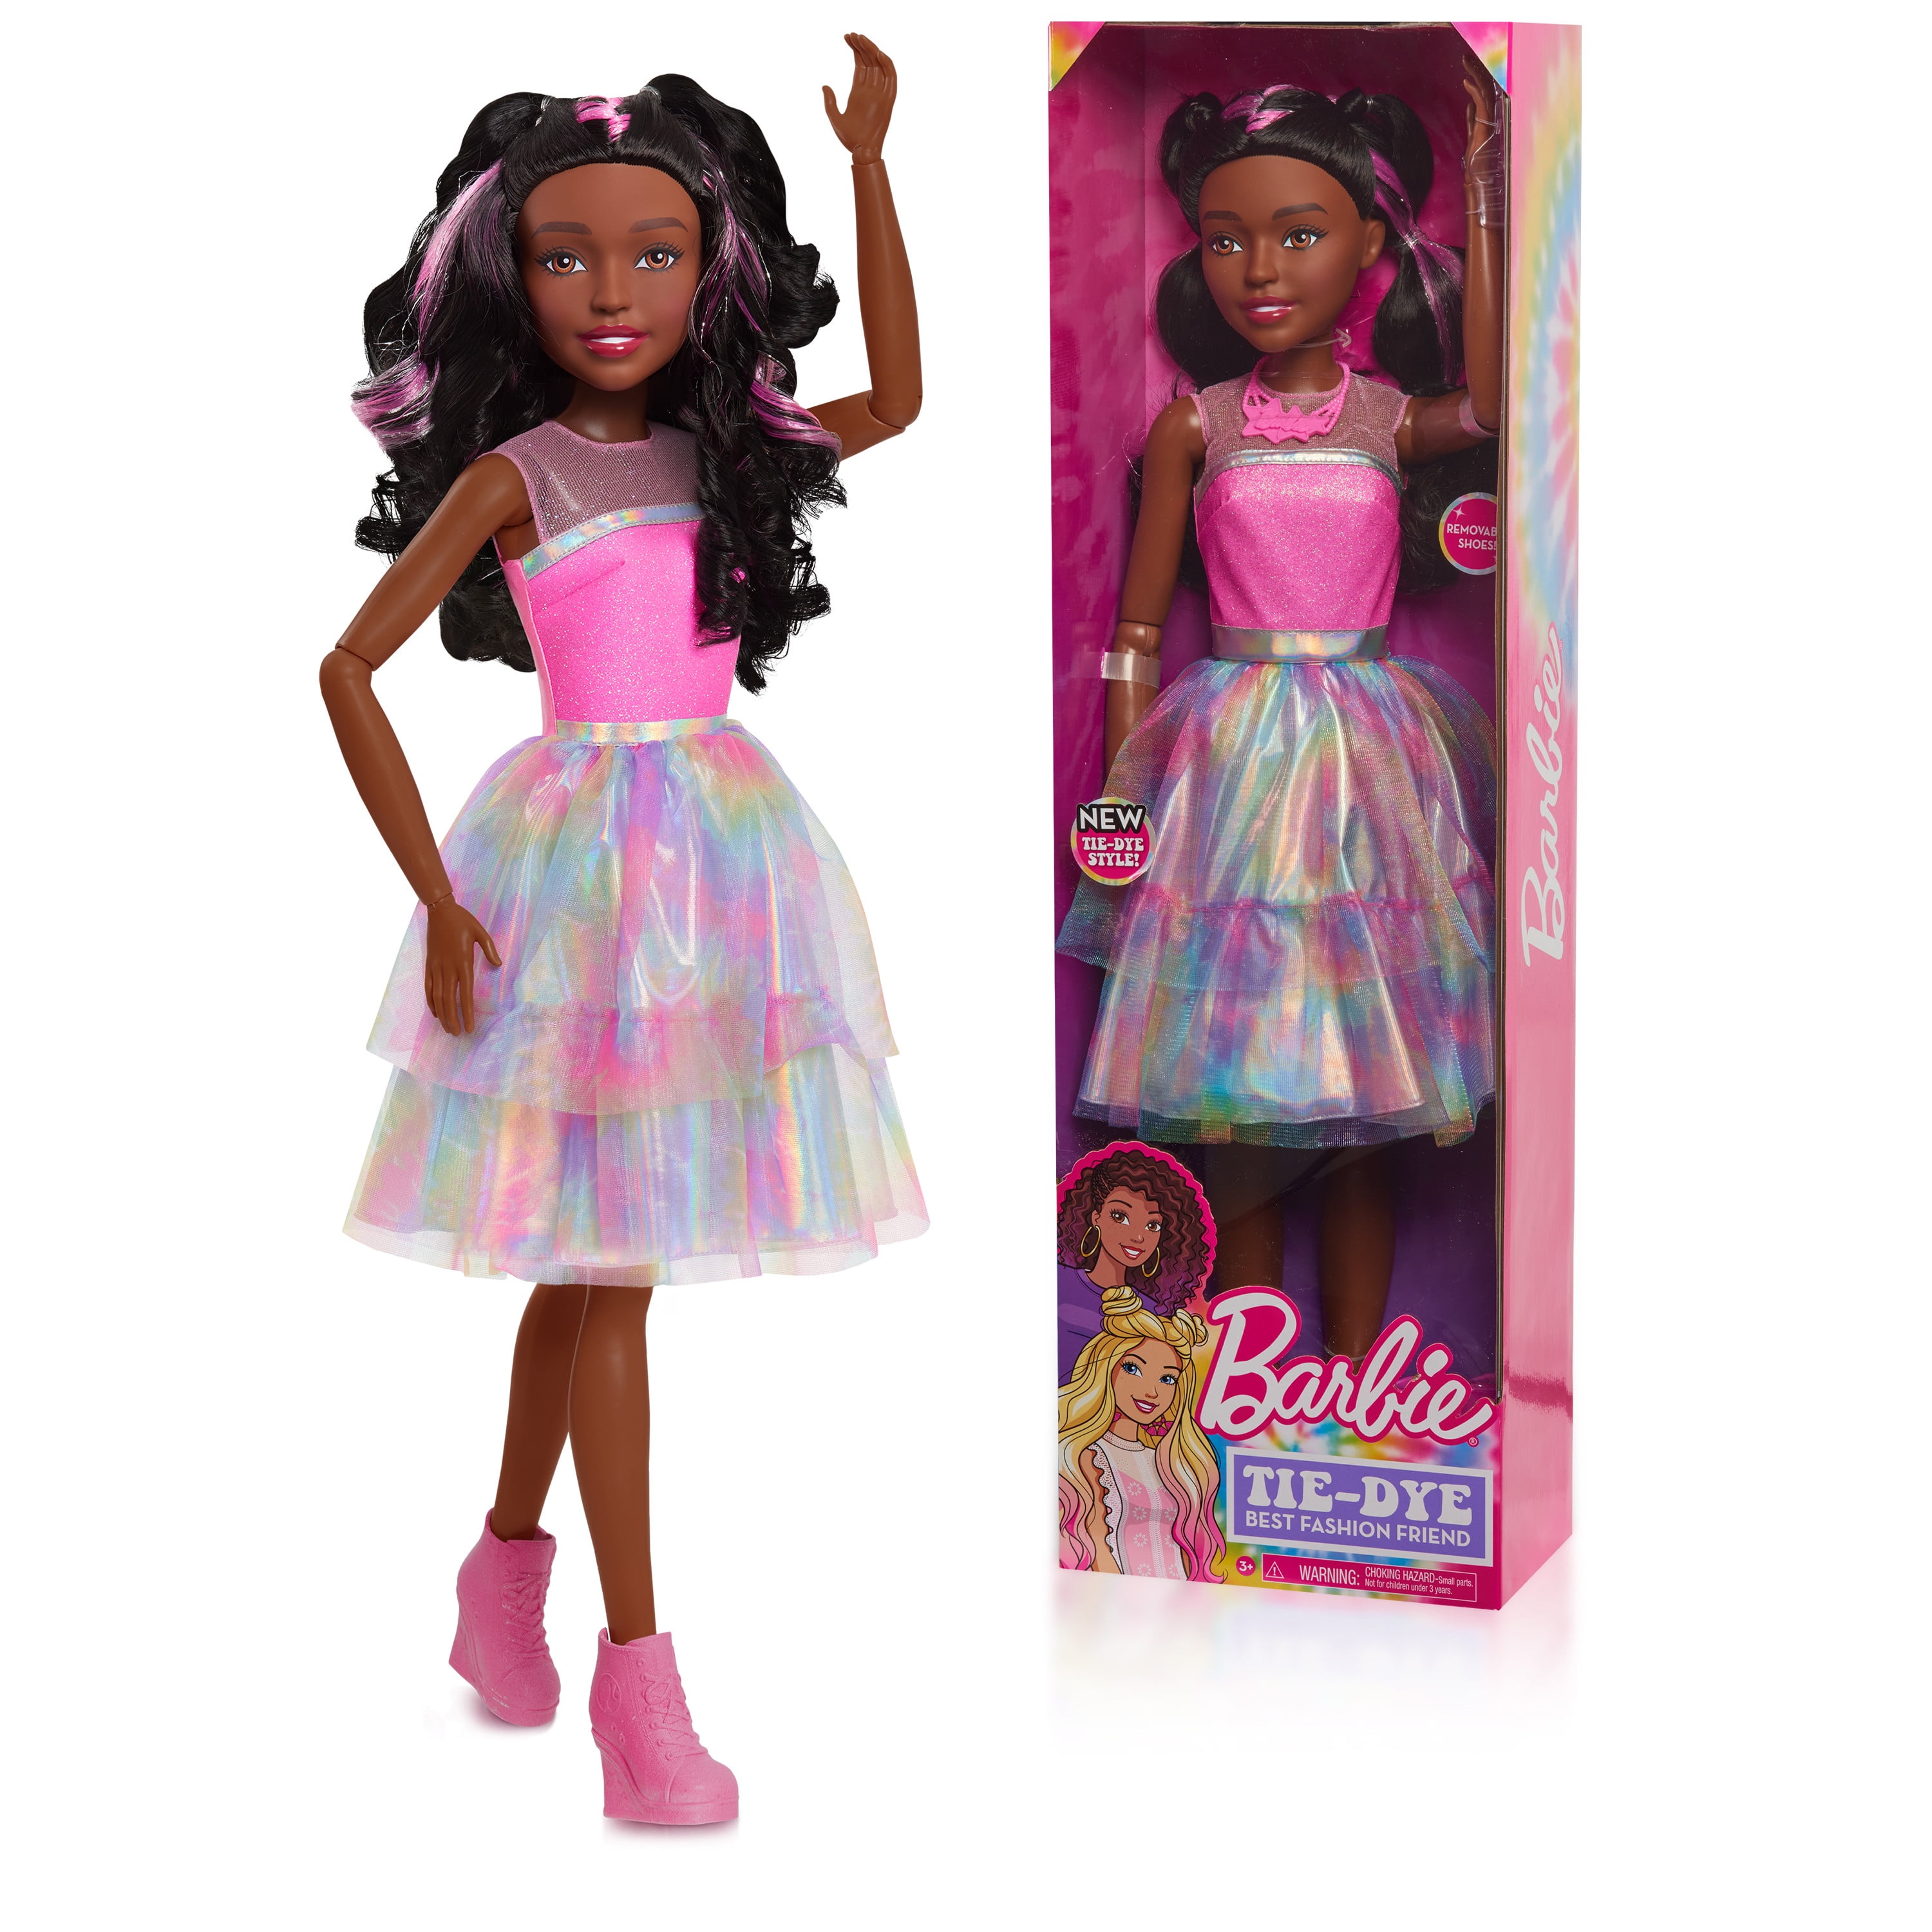 Barbie 28-Inch Tie Dye Style Best Fashion Friend, Dark Brown Hair,  Kids Toys for Ages 3 Up, Gifts and Presents